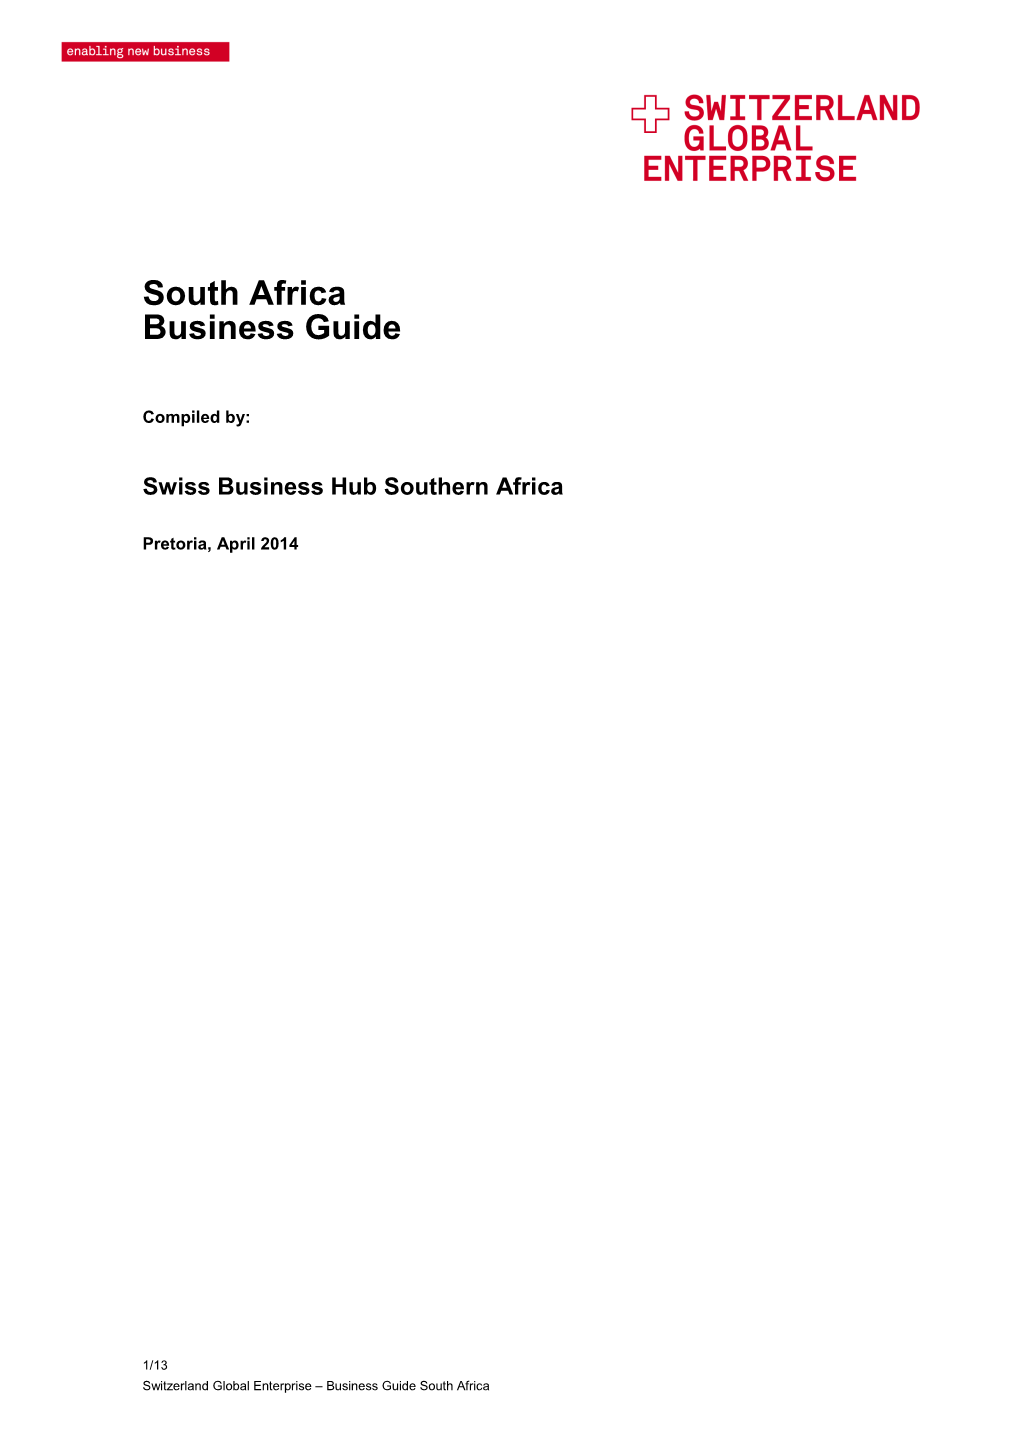 South Africa Business Guide